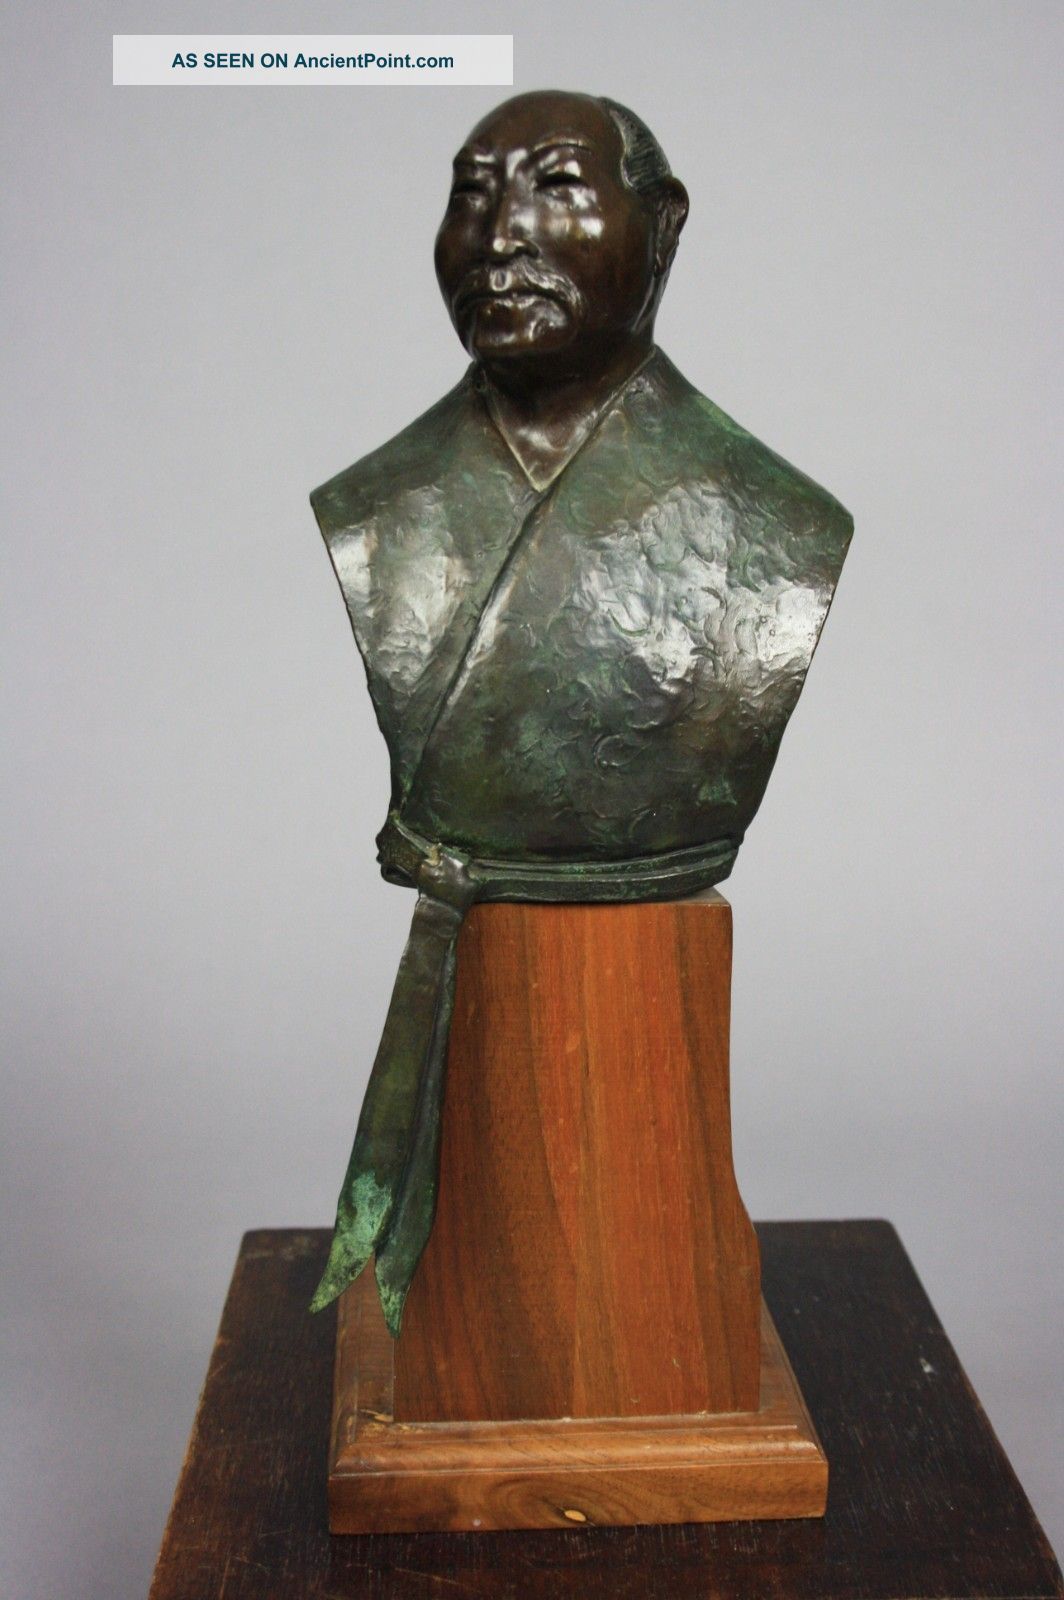 Japanese Bronze Statue By James Turner Statues photo